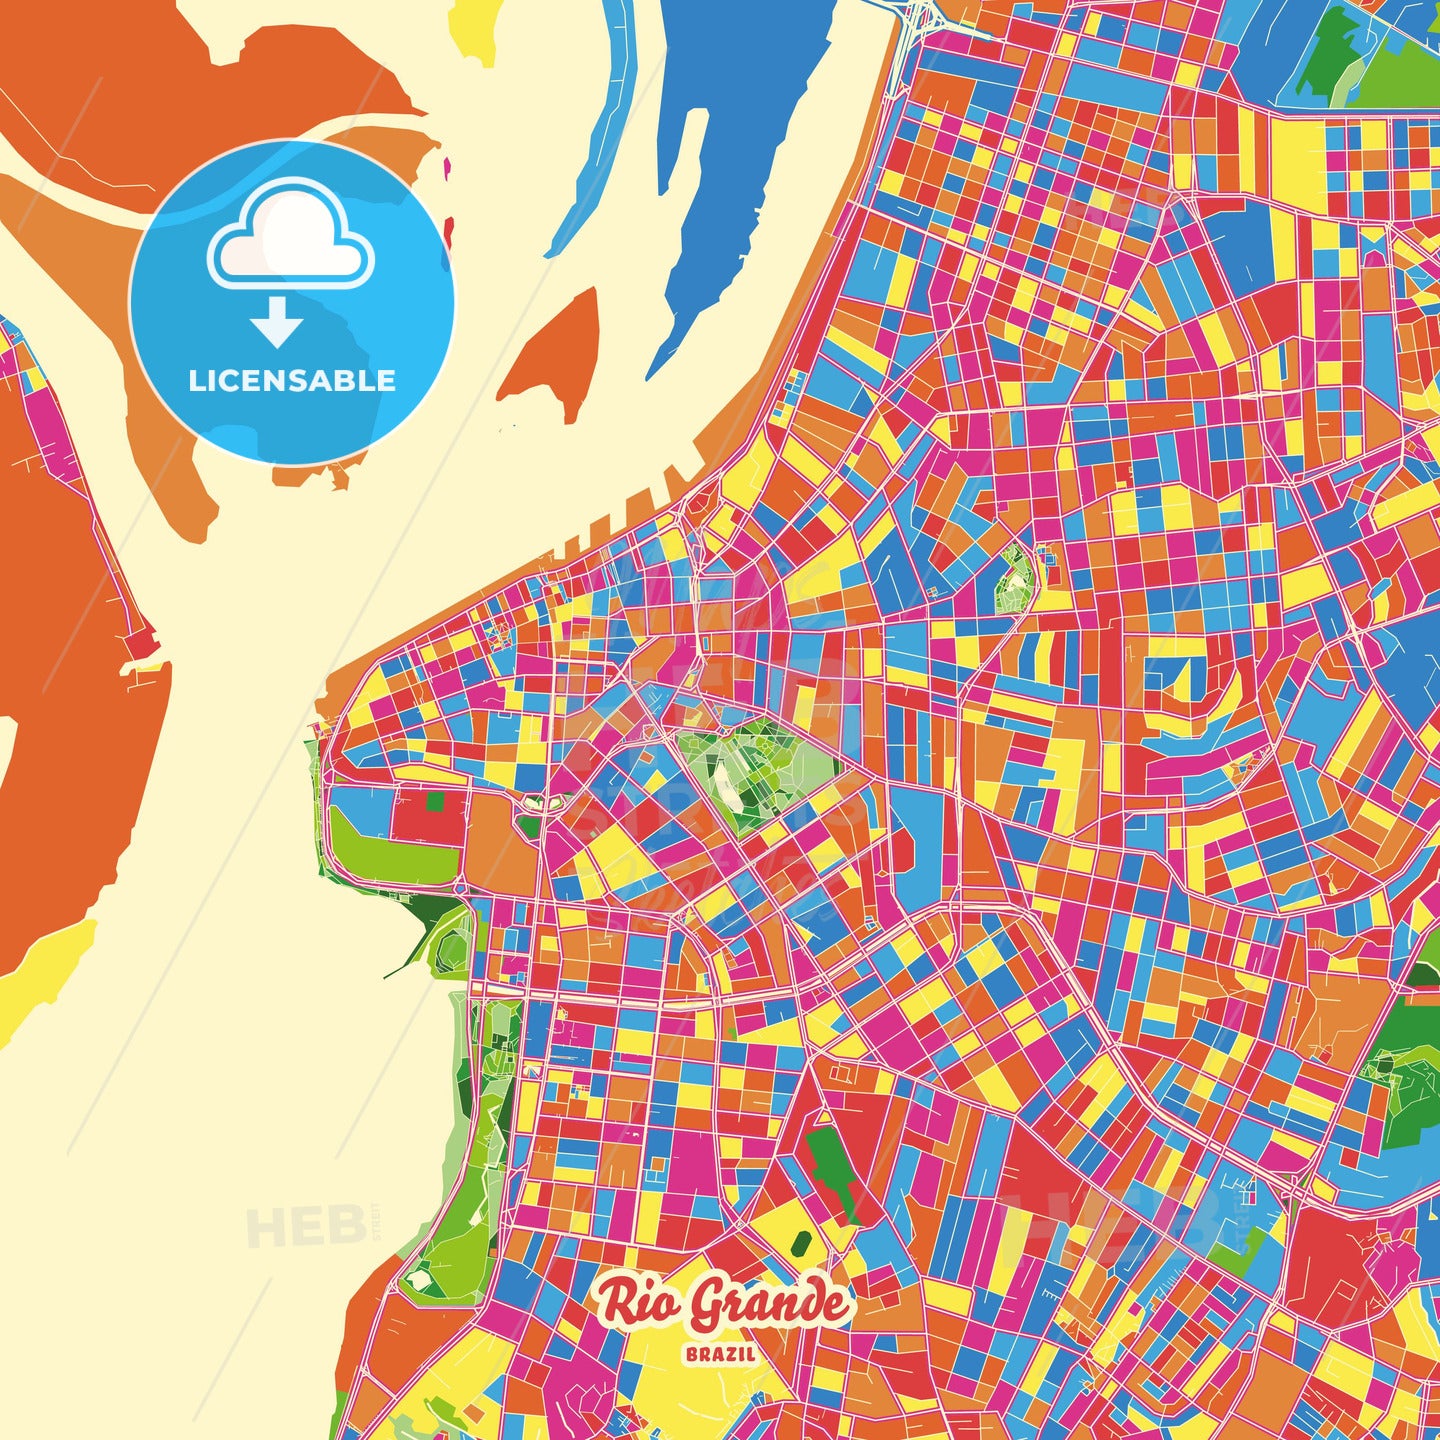 Rio Grande, Brazil Crazy Colorful Street Map Poster Template - HEBSTREITS Sketches